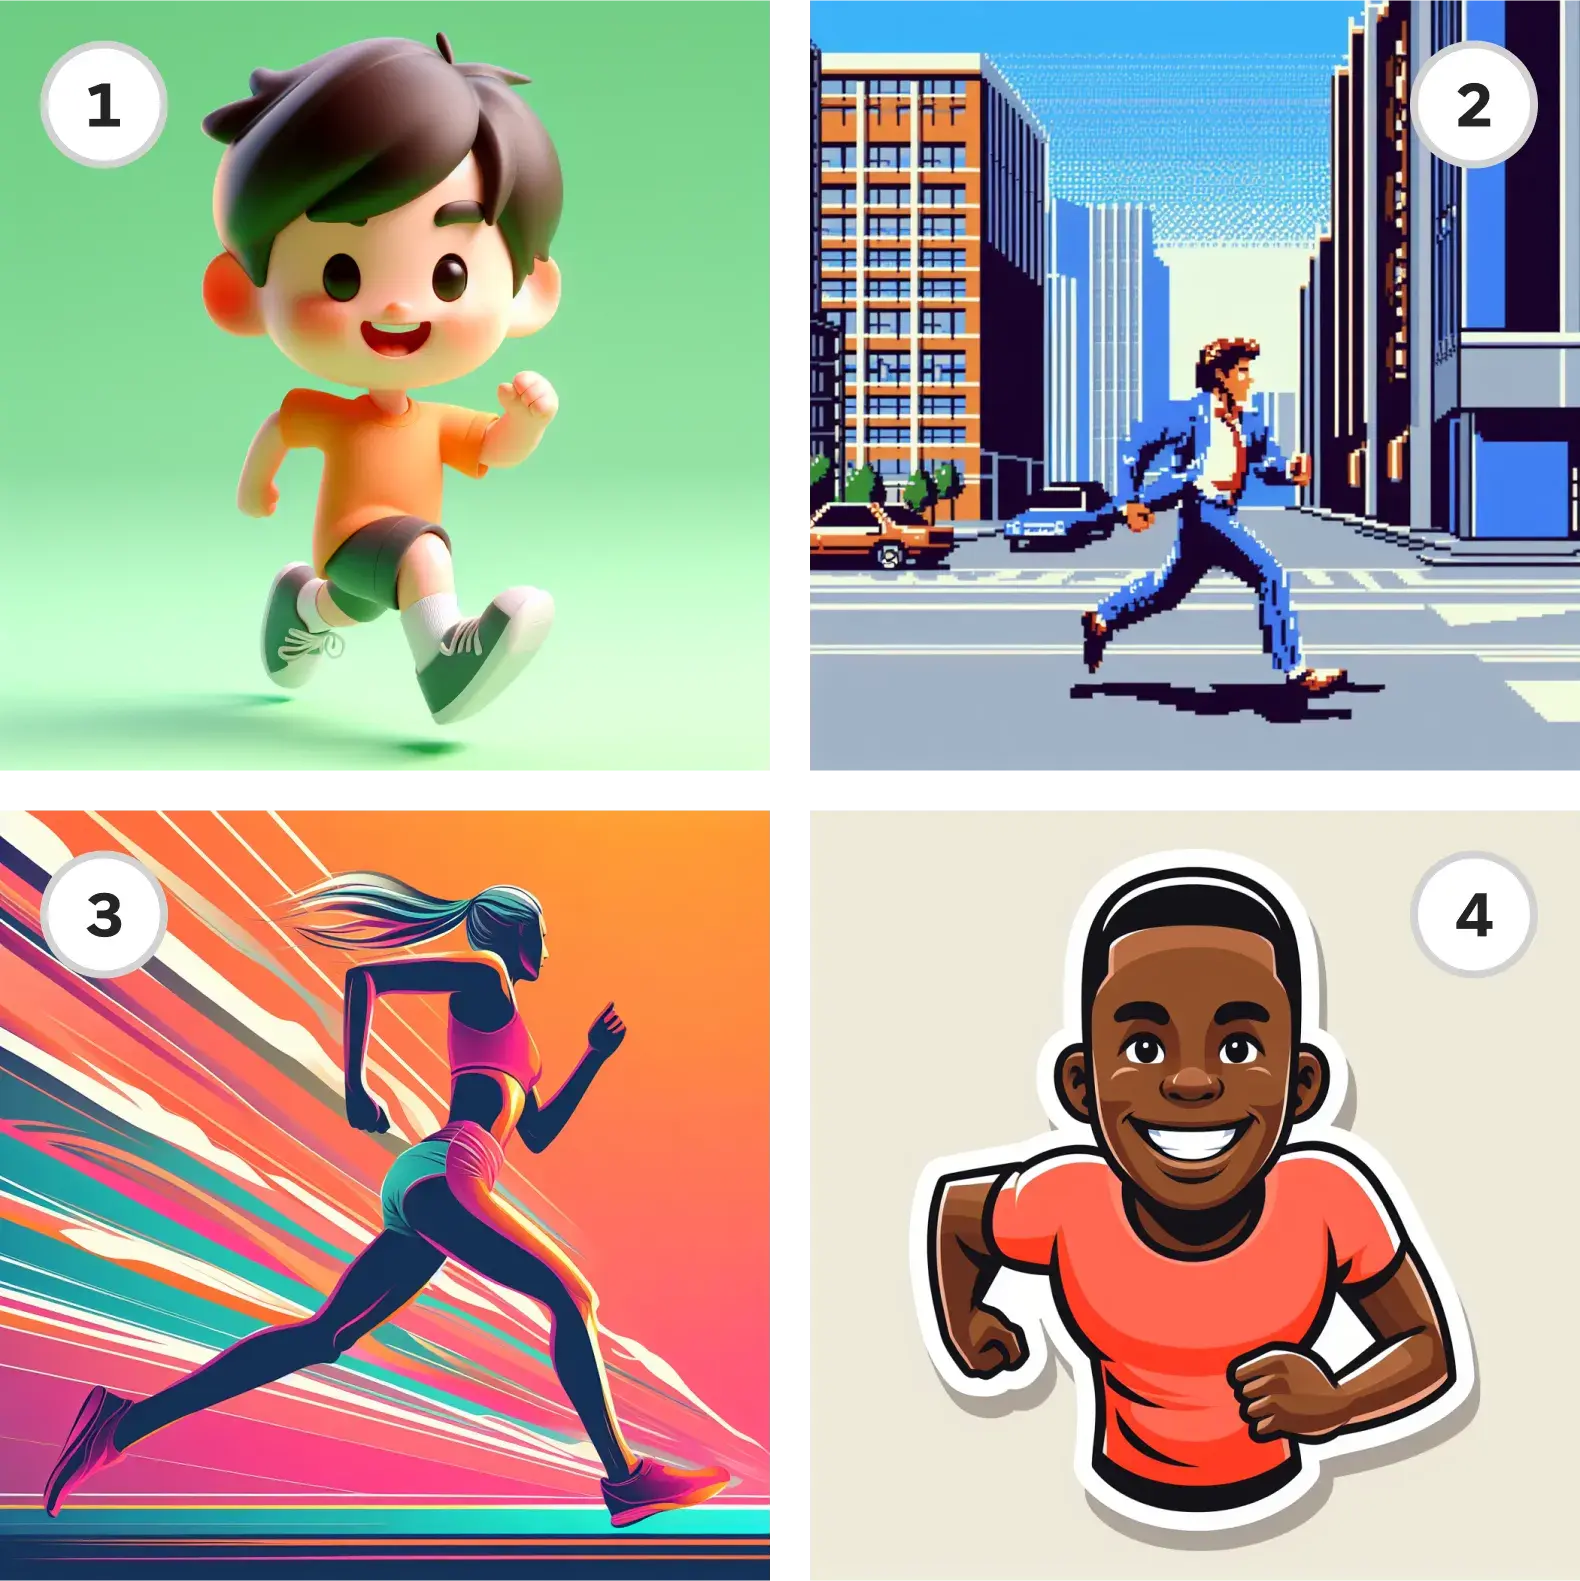 Four different images of people running, rendered in different digital styles.